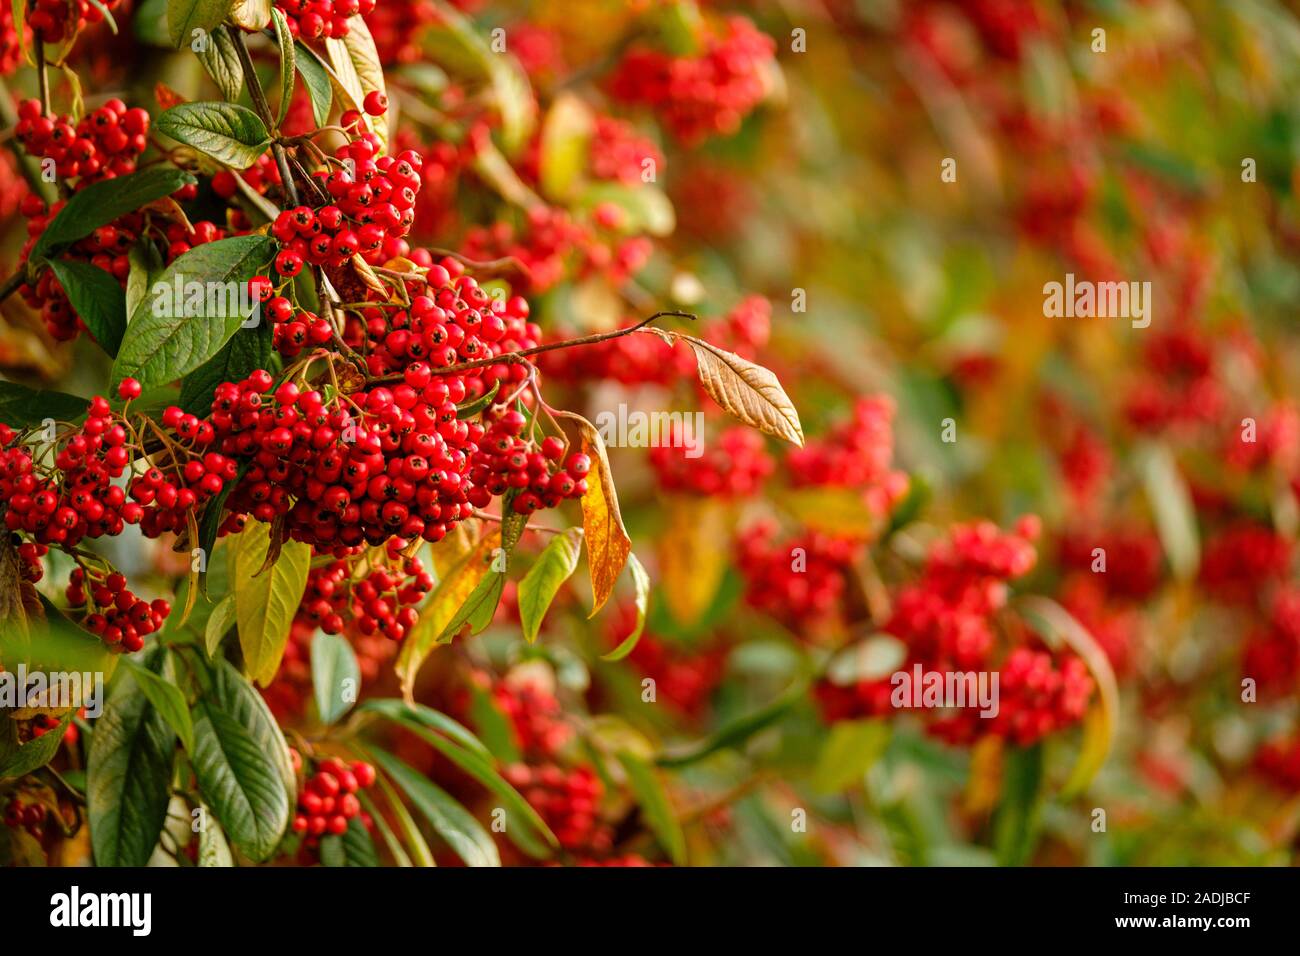 Cotoneaster berries bring colour and wildlife into the winter garden. Stock Photo